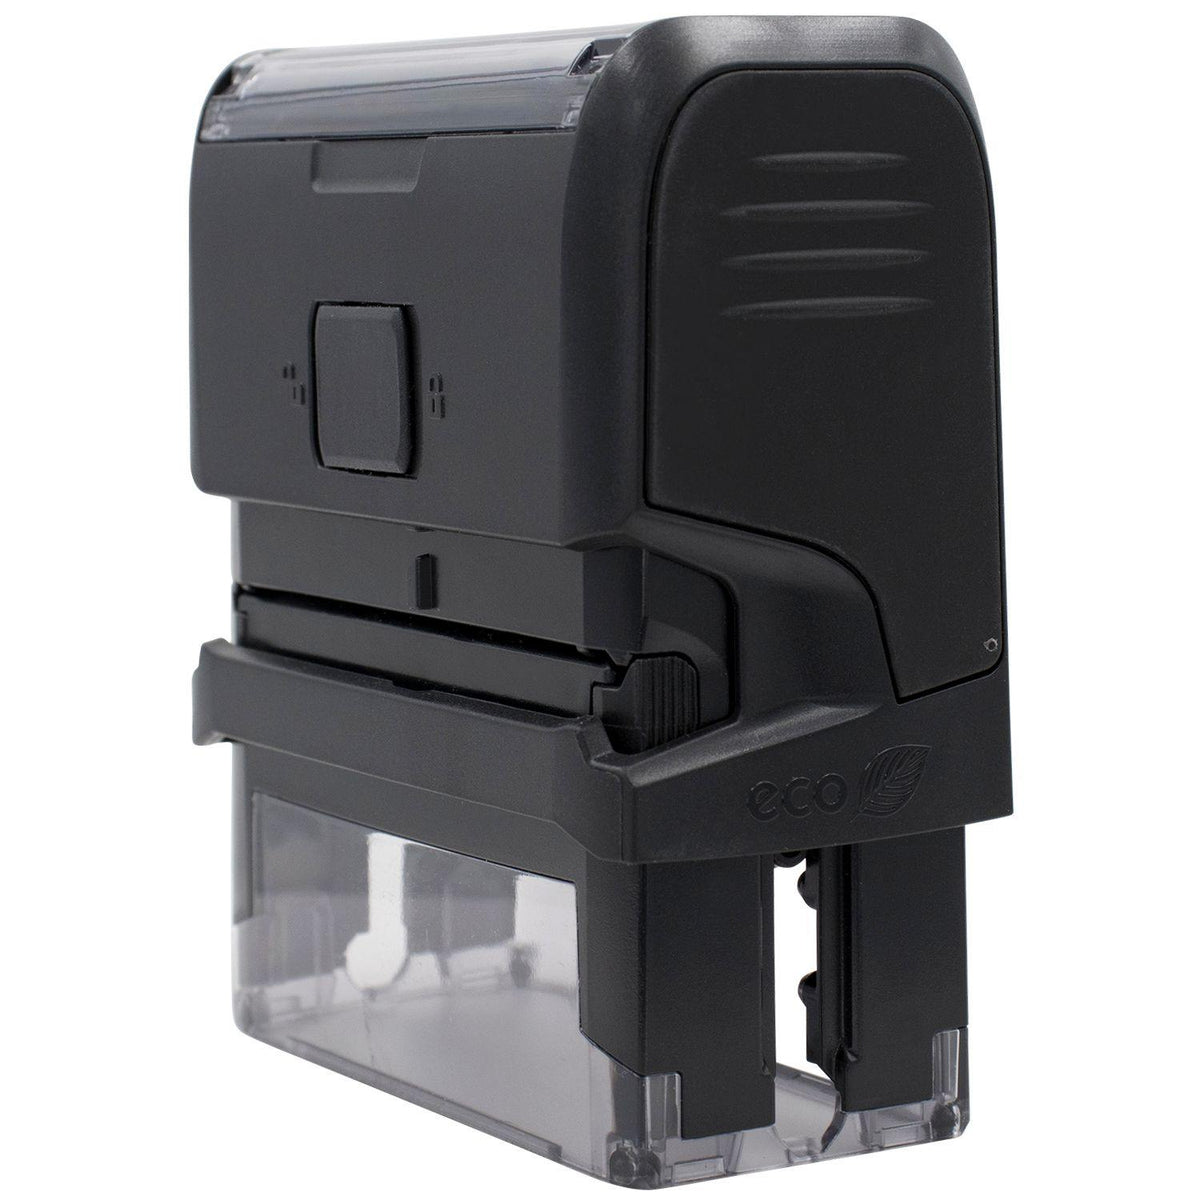 Large Self Inking Service Copy Stamp - Engineer Seal Stamps - Brand_Trodat, Impression Size_Large, Stamp Type_Self-Inking Stamp, Type of Use_Professional